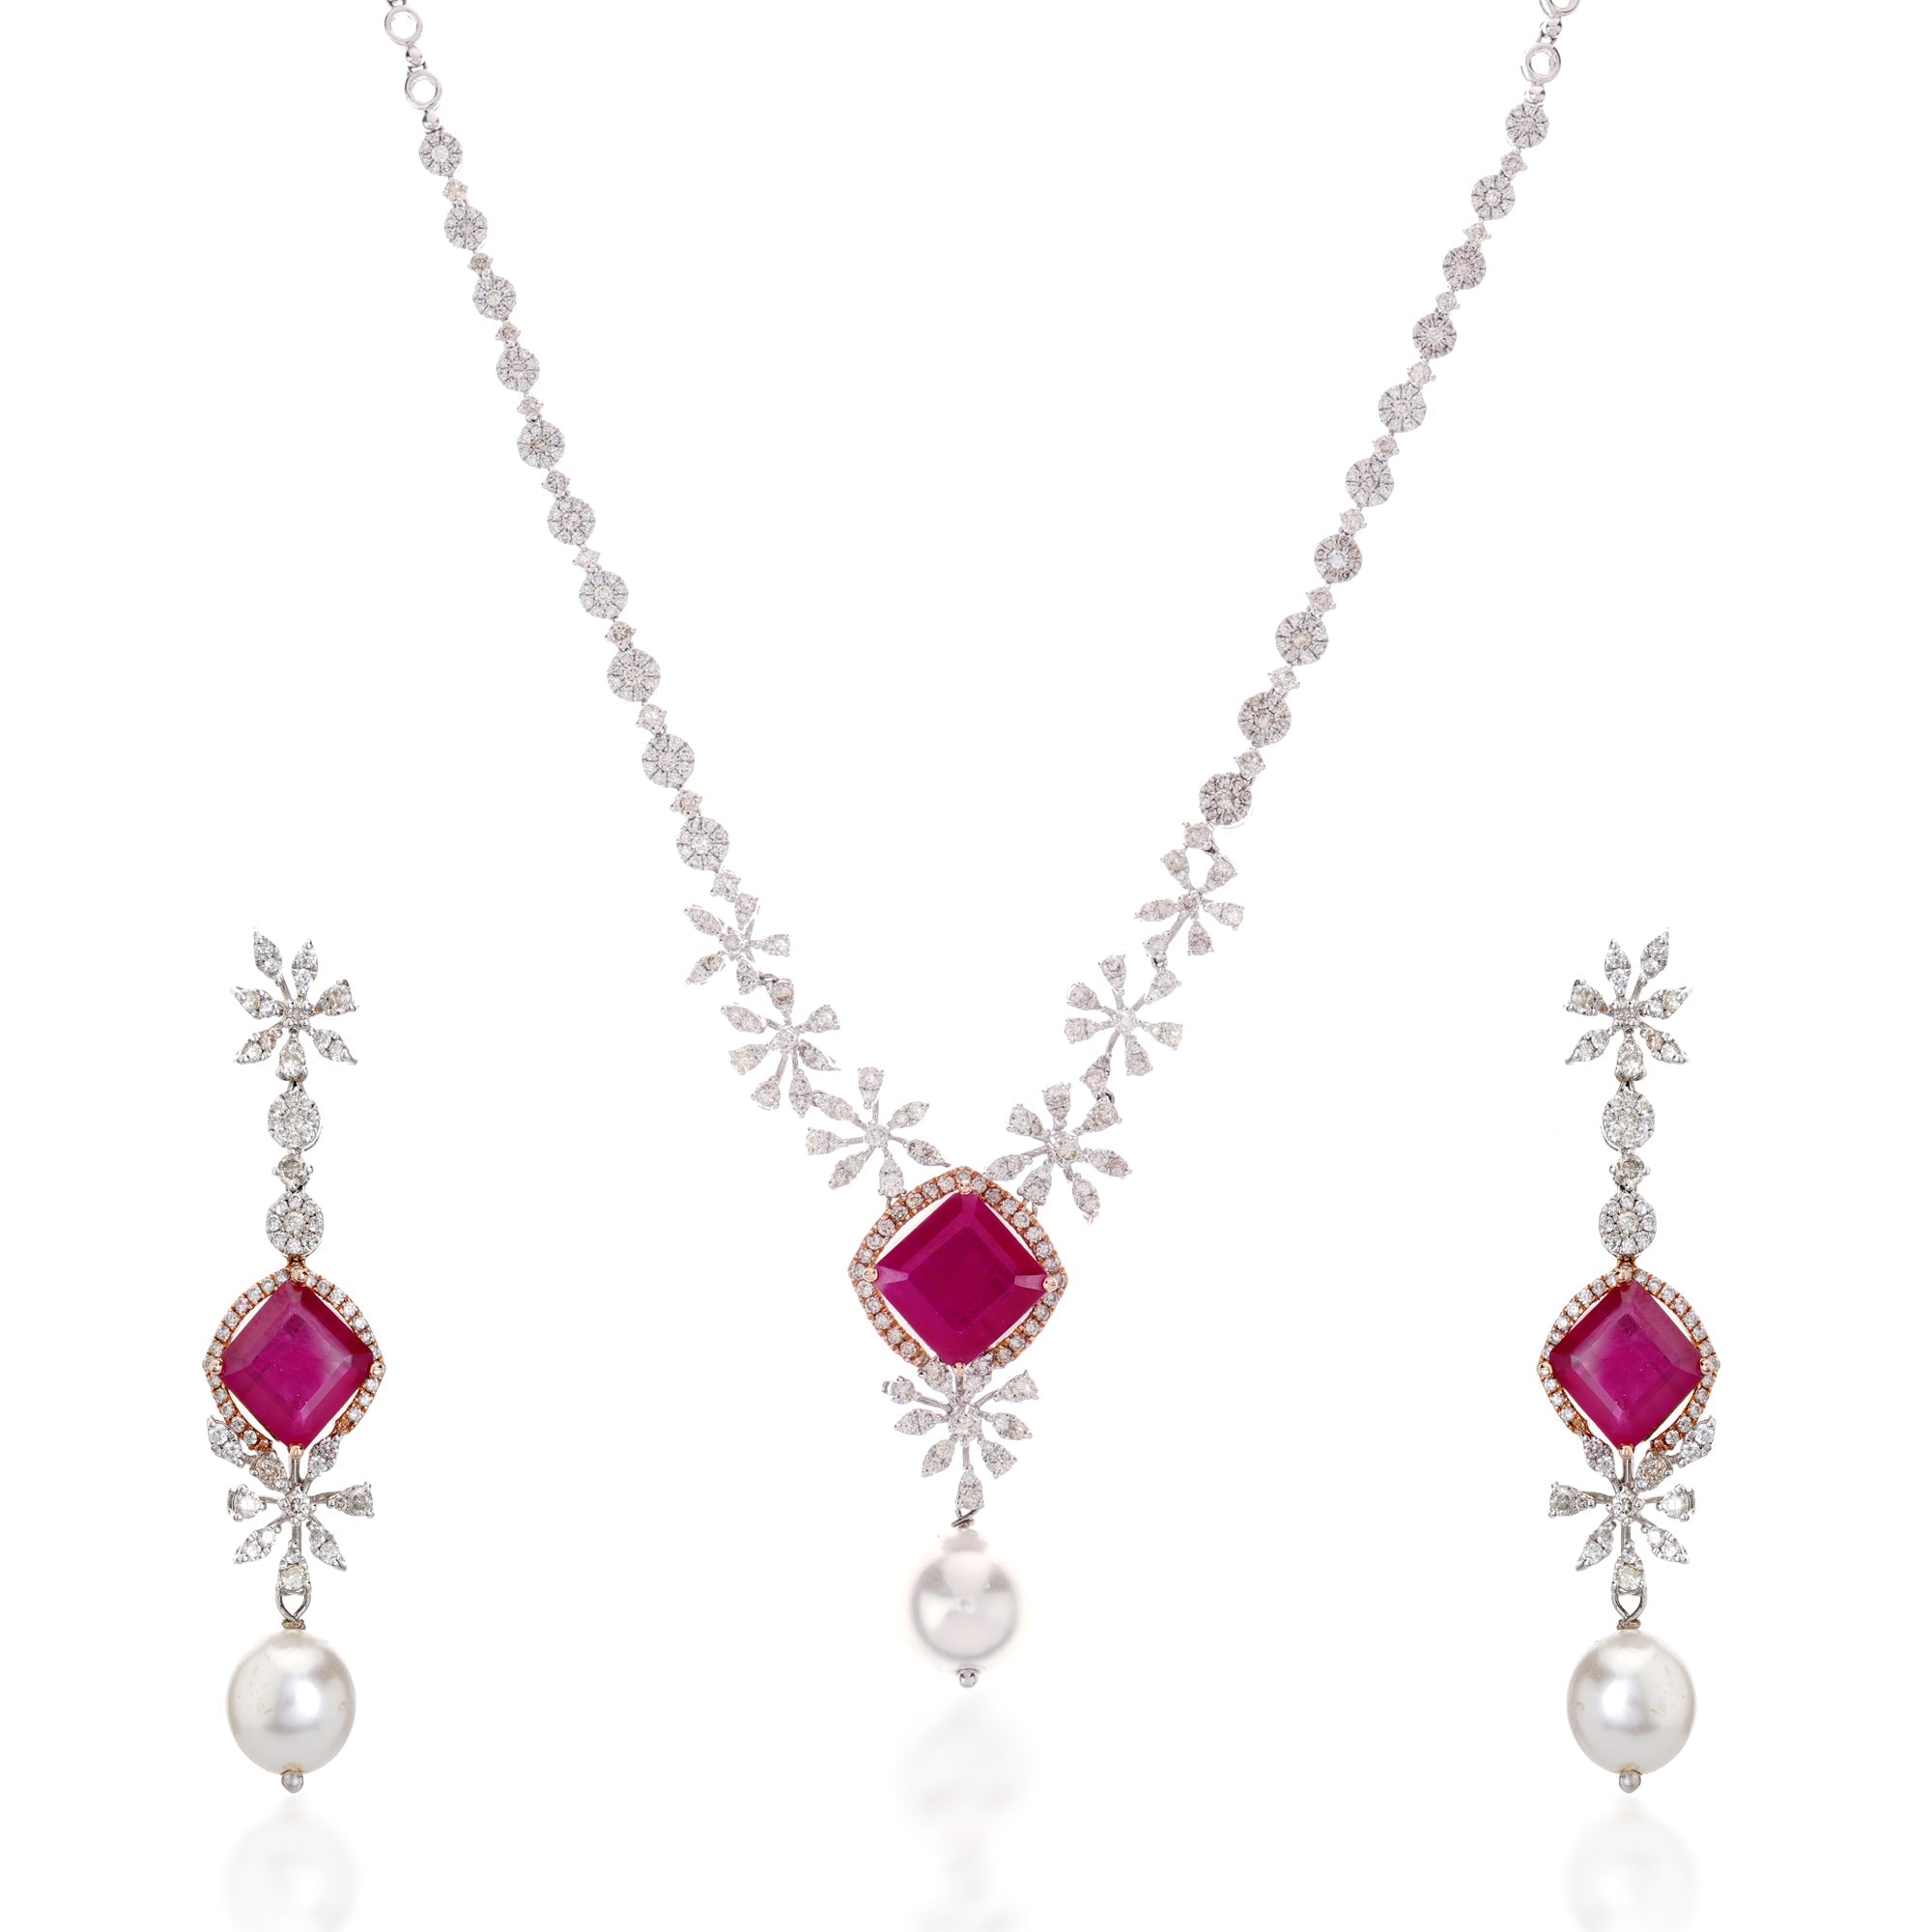 Ruby and Pearl Diamond Necklace Set